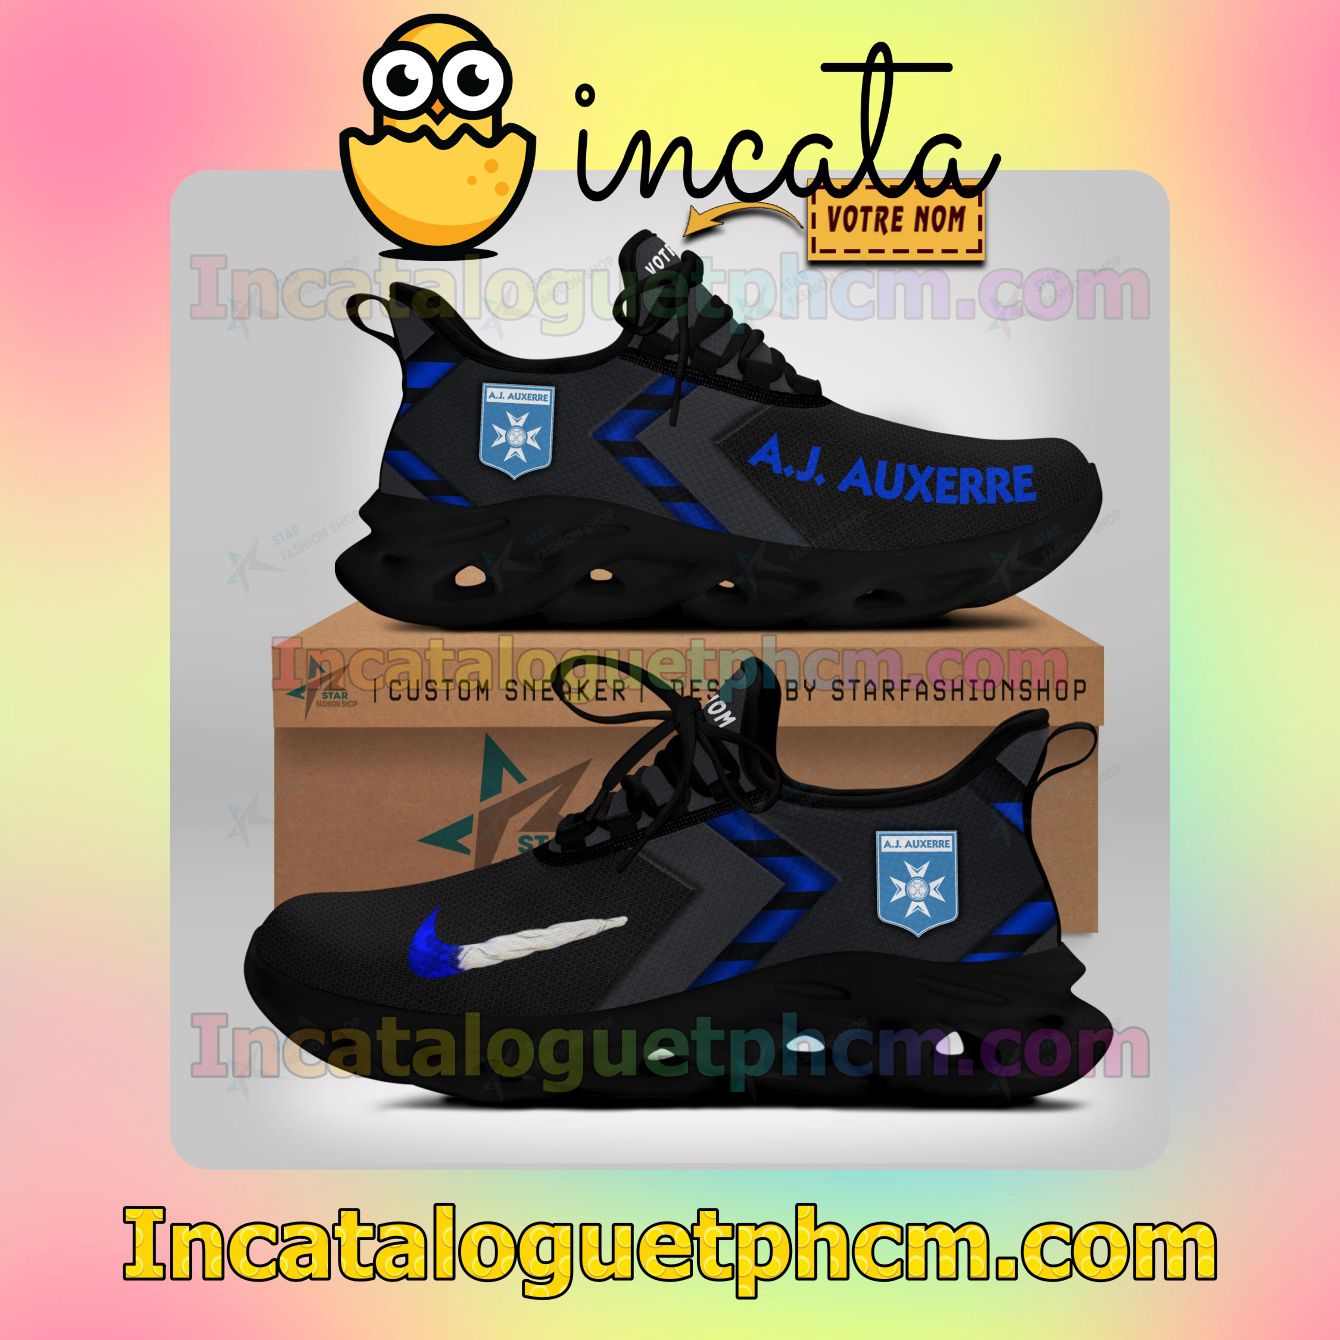 Real AJ Auxerre Low Top Shoes